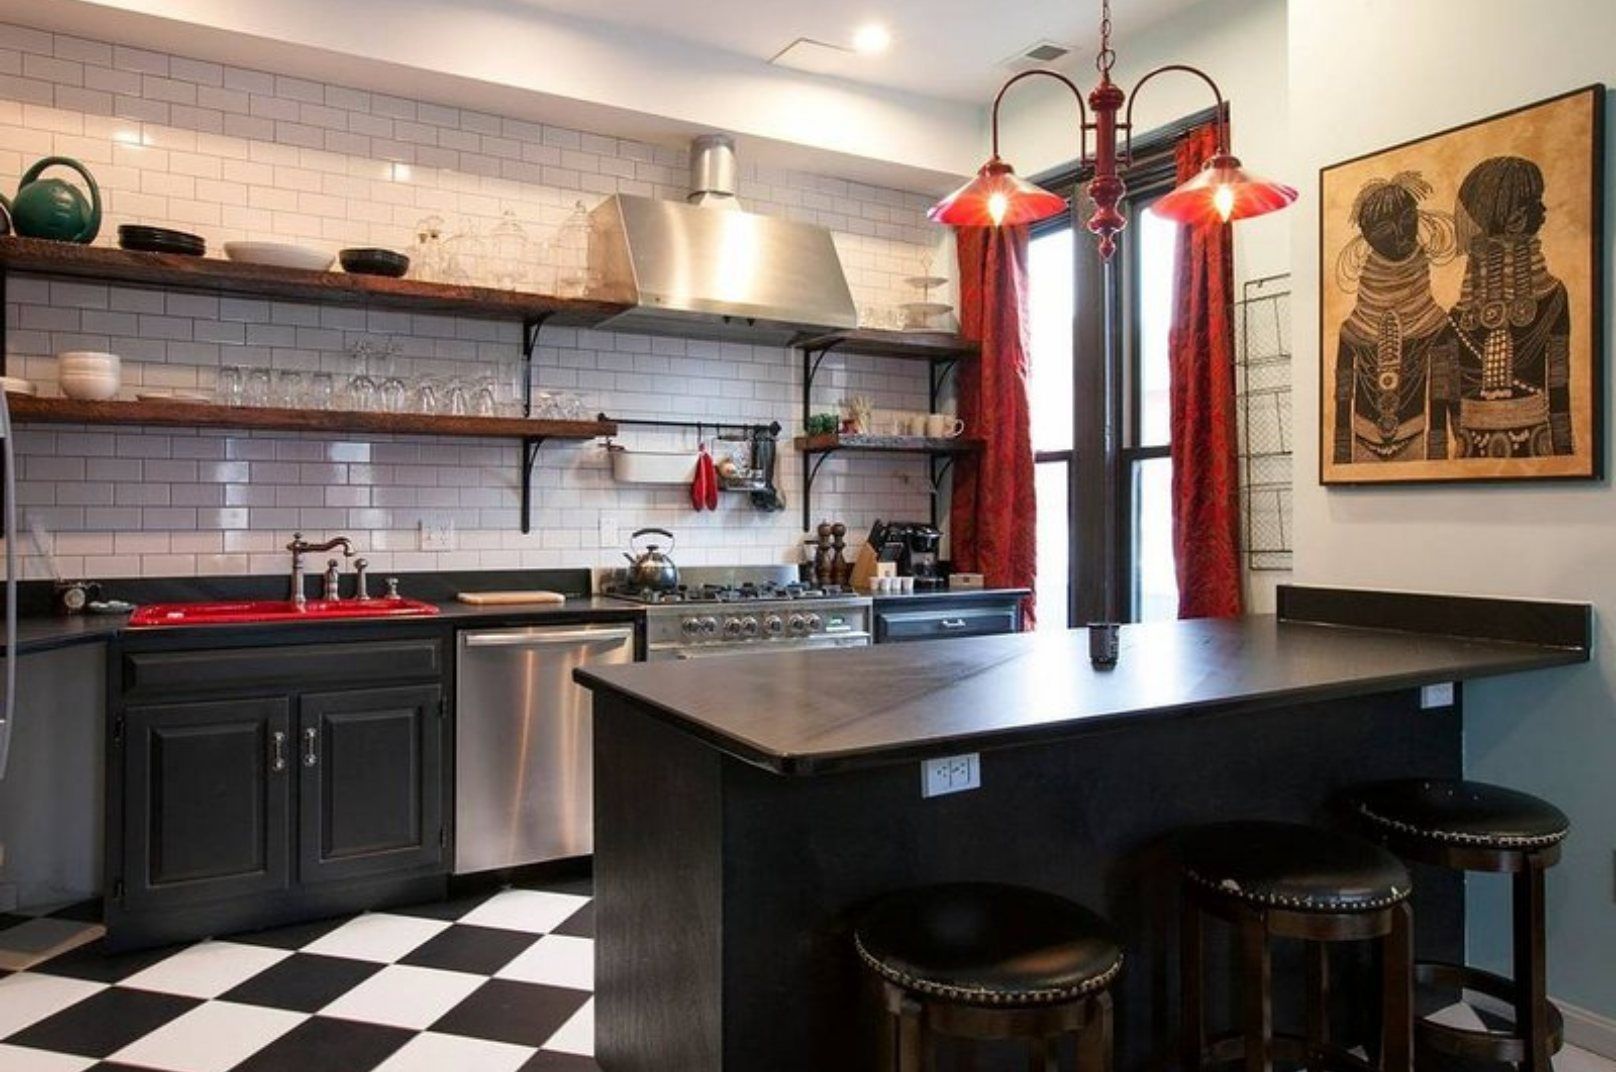 The Best Airbnbs in Washington D.C.